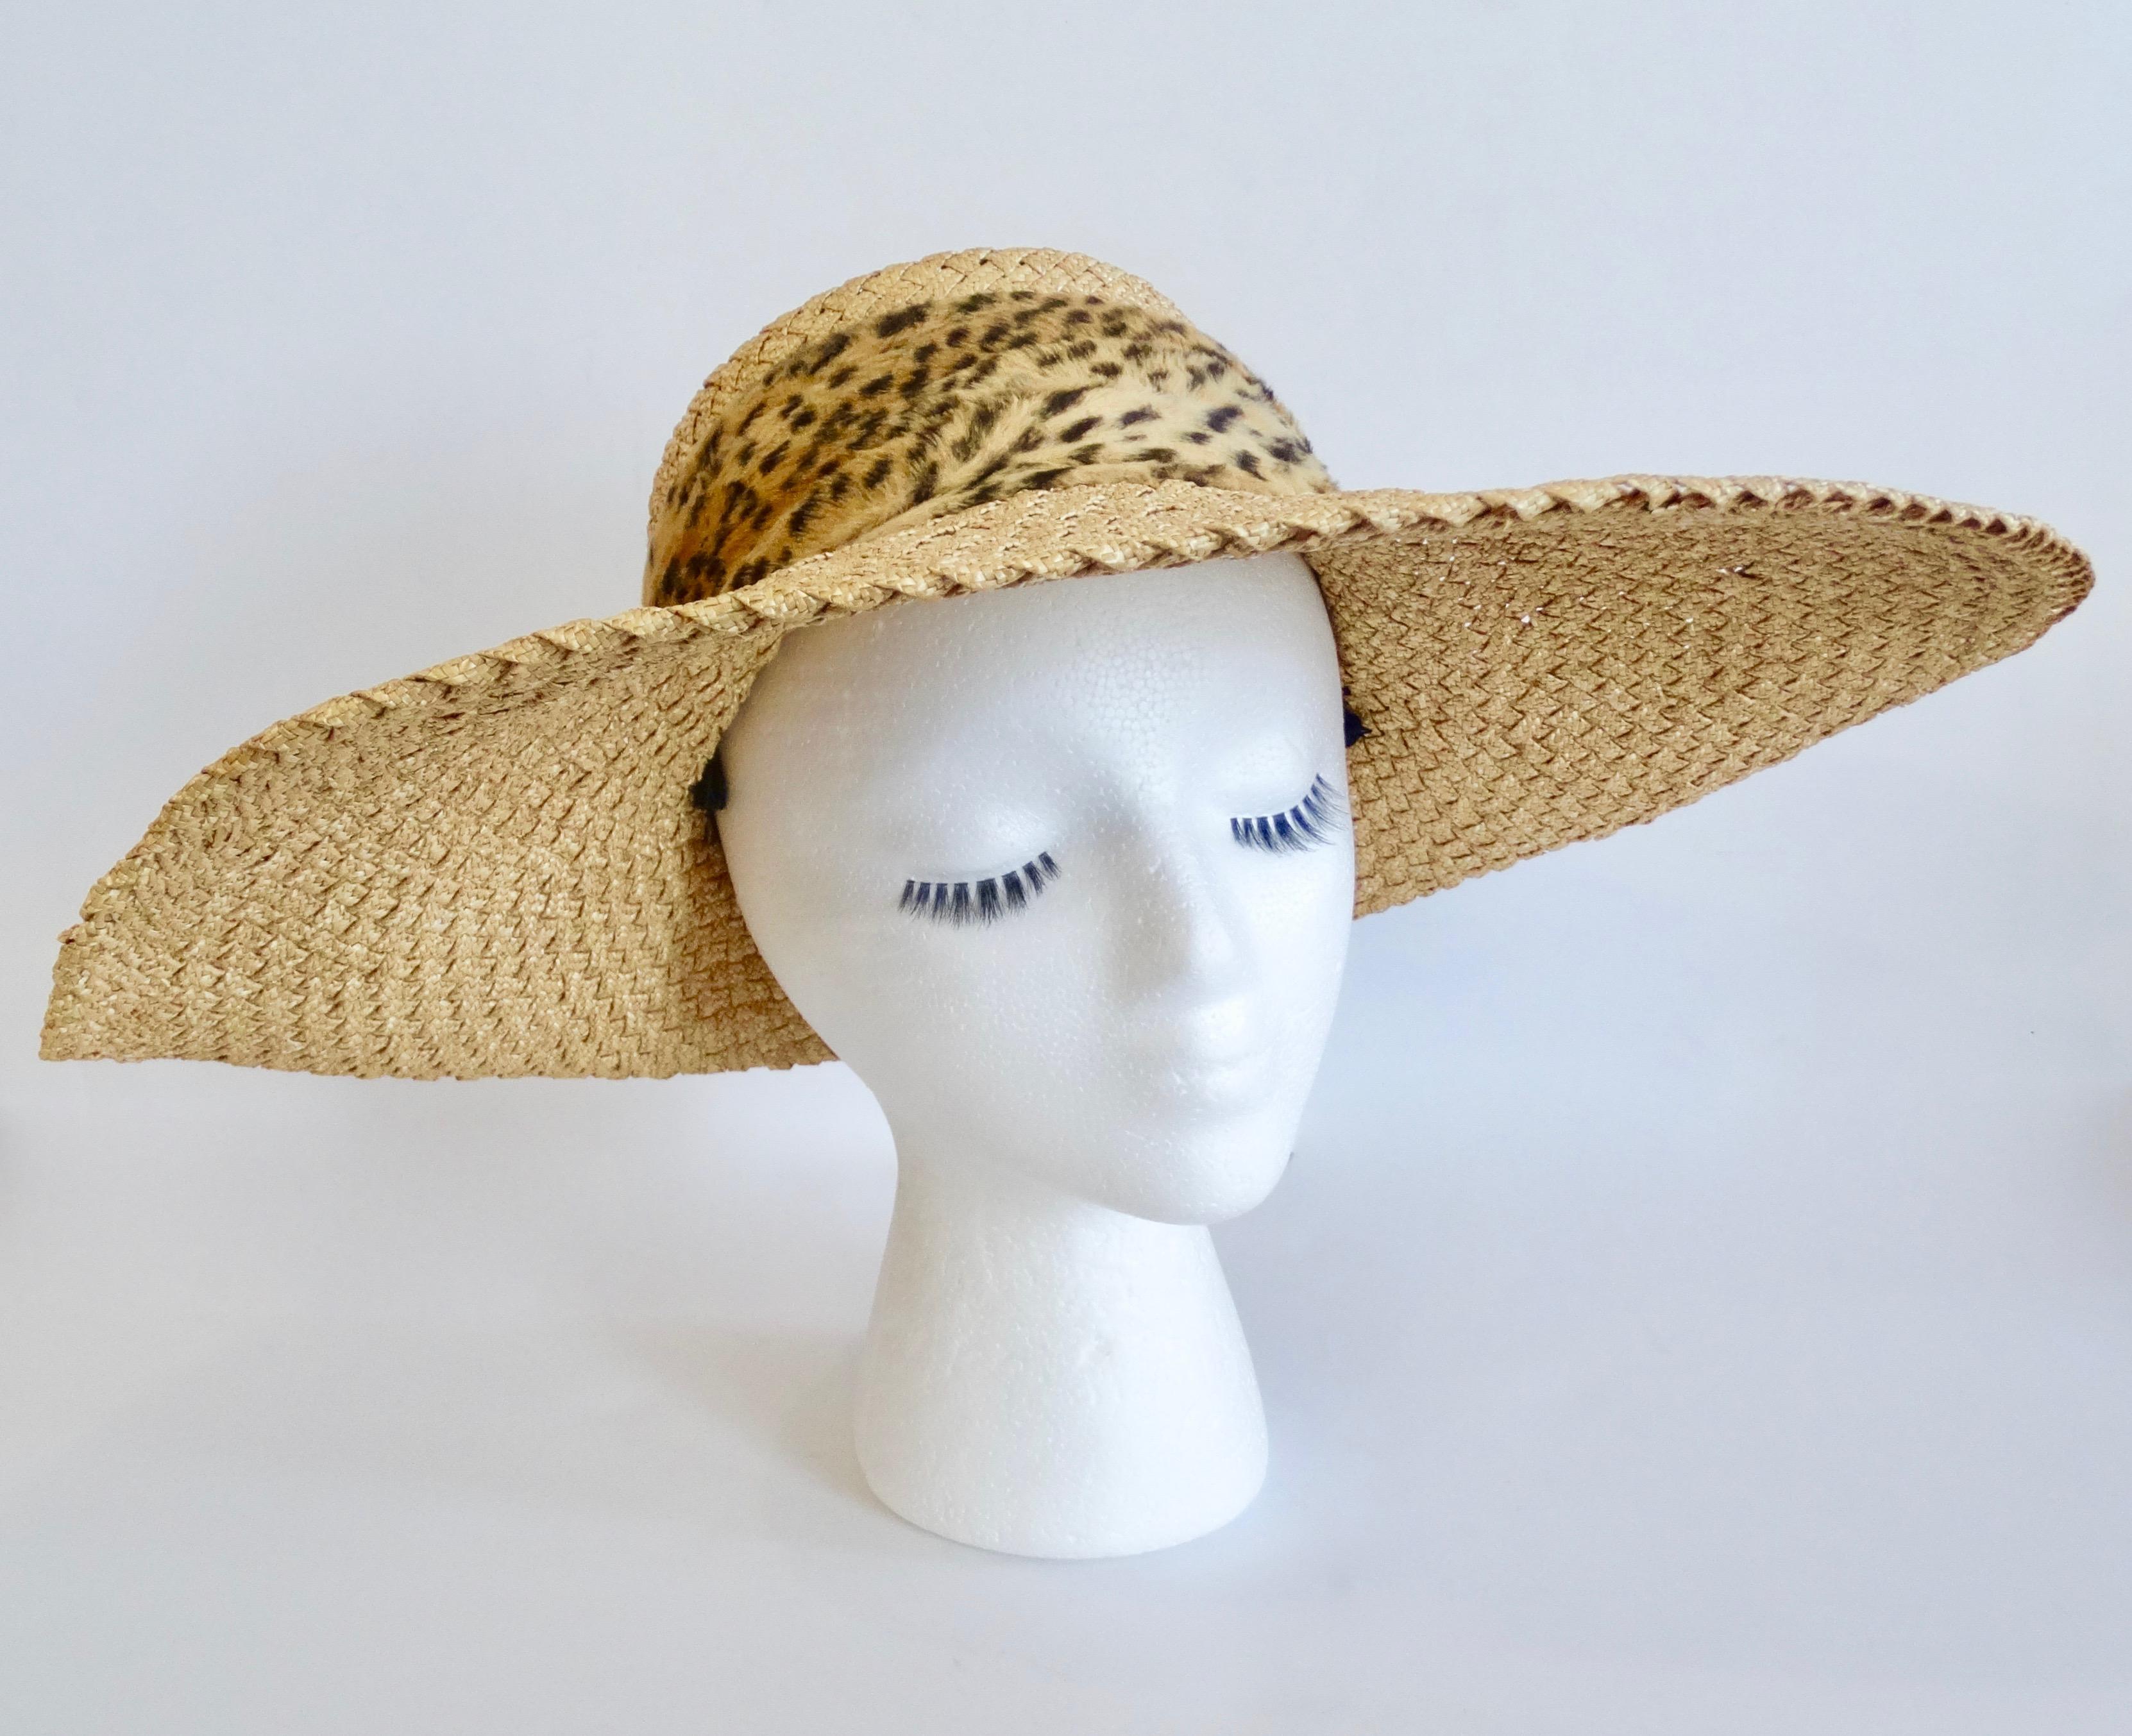 Make a fashion statement with this amazing Whittall & Shon hat! Circa 1980s, this straw hat features a wide asymmetrical propped brim and a faux fur cheetah print band. Chic, timeless and fabulous! This sun hat is sure to turn heads on your next